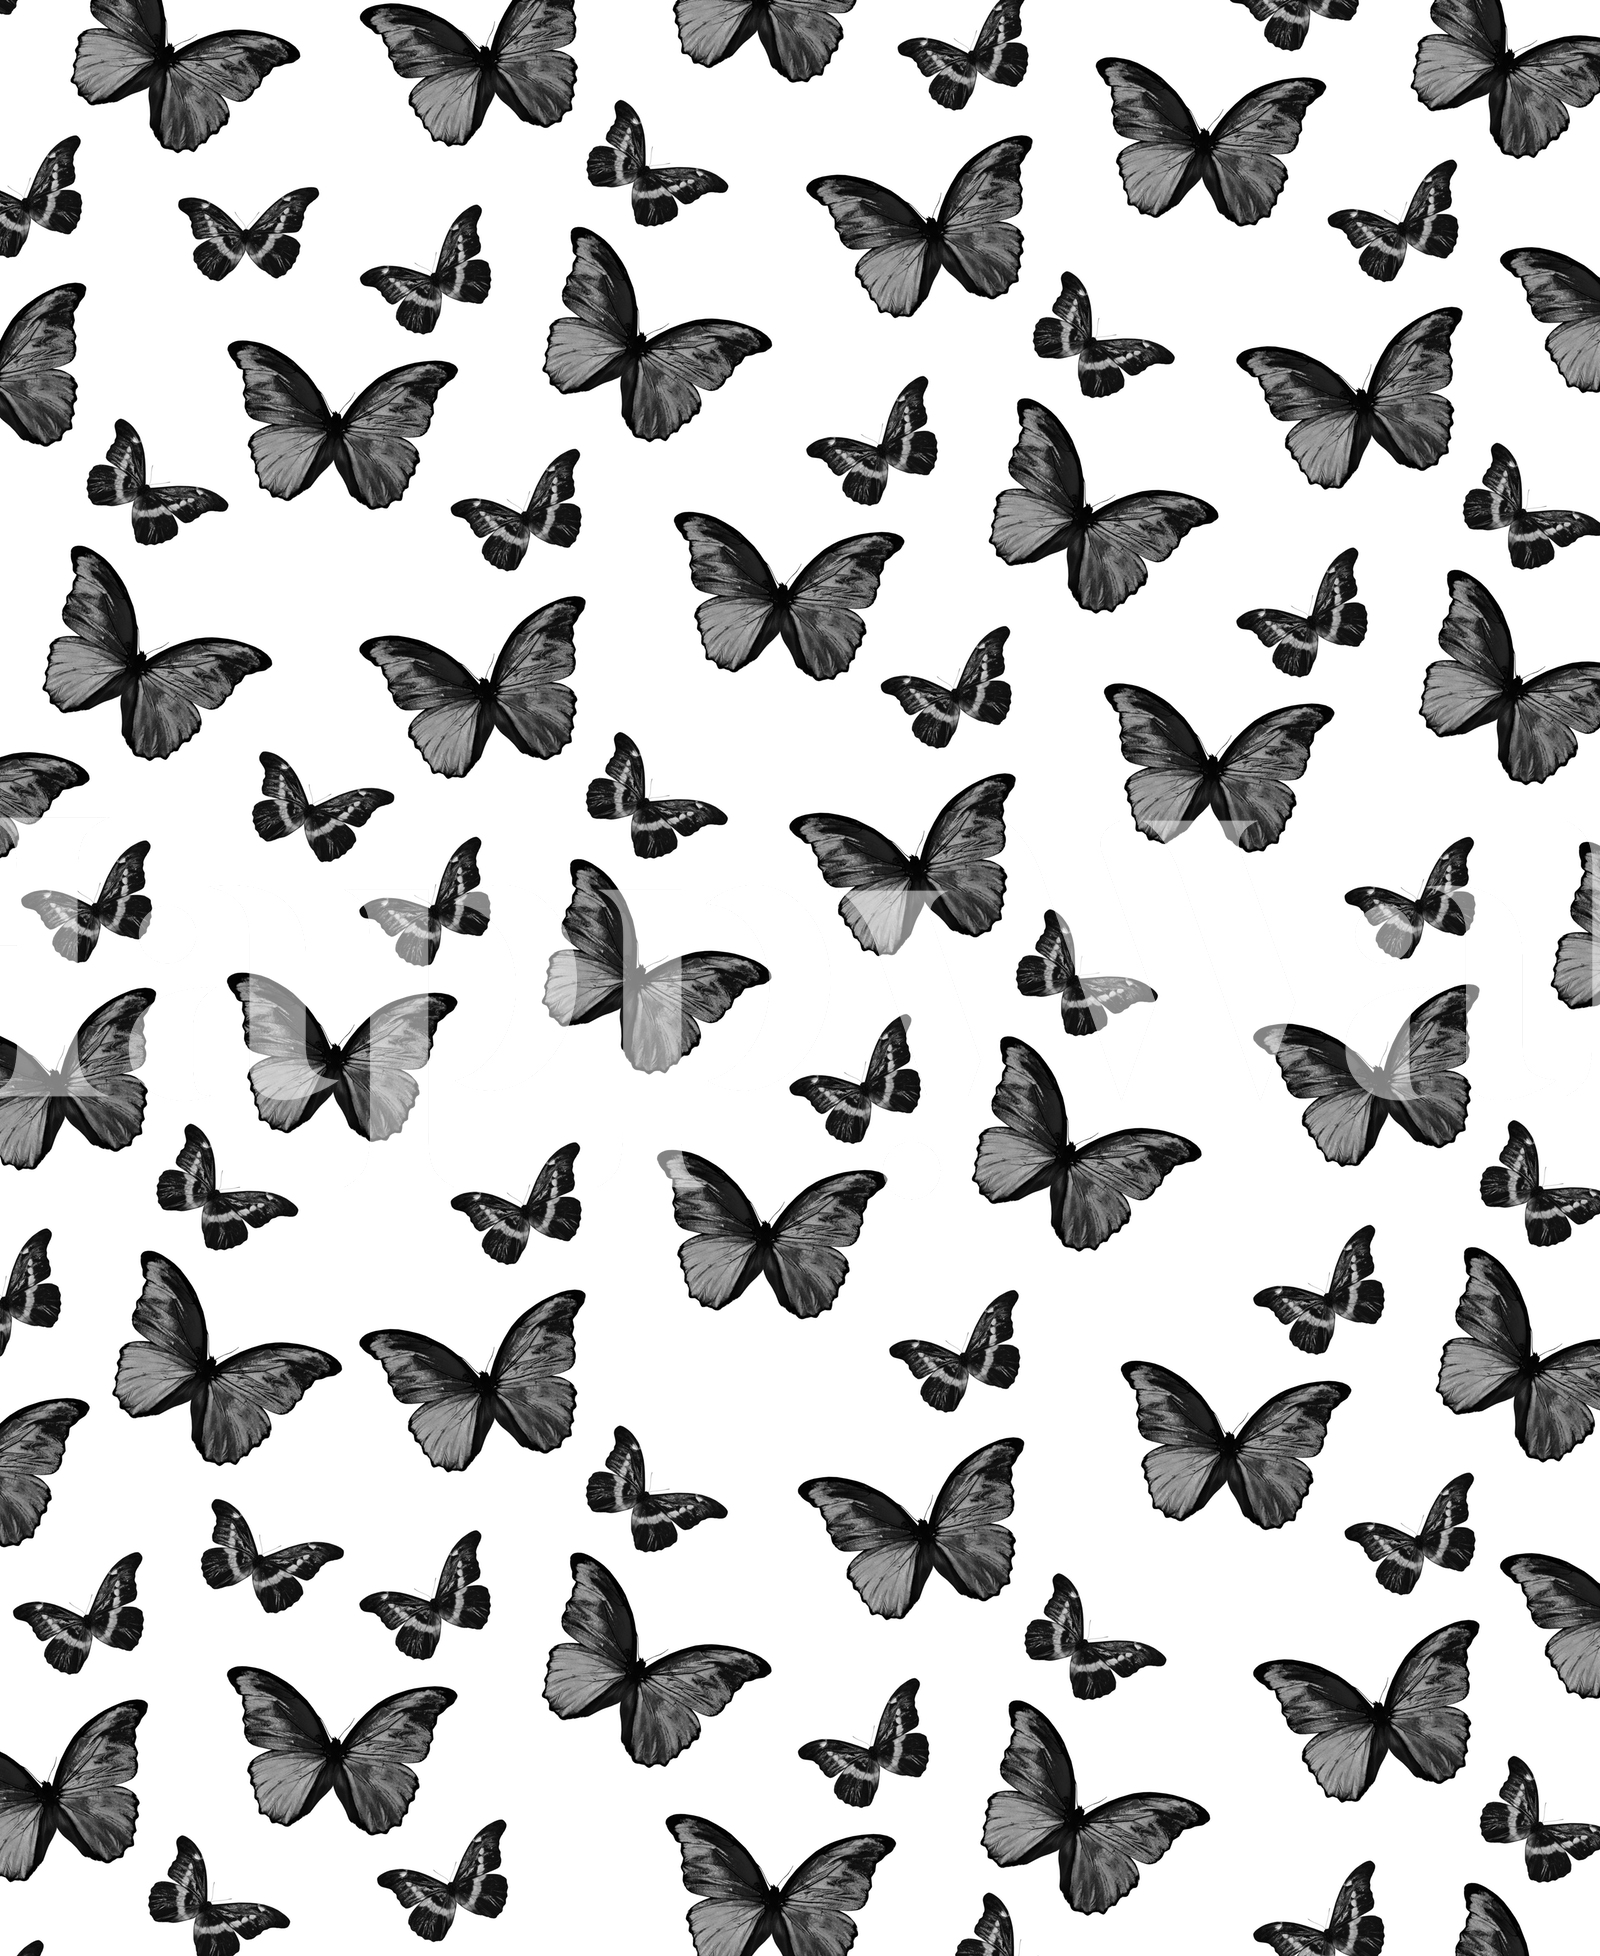 Black and White Butterfly Wallpaper | Monochrome Butterflies Mural |  Happywall